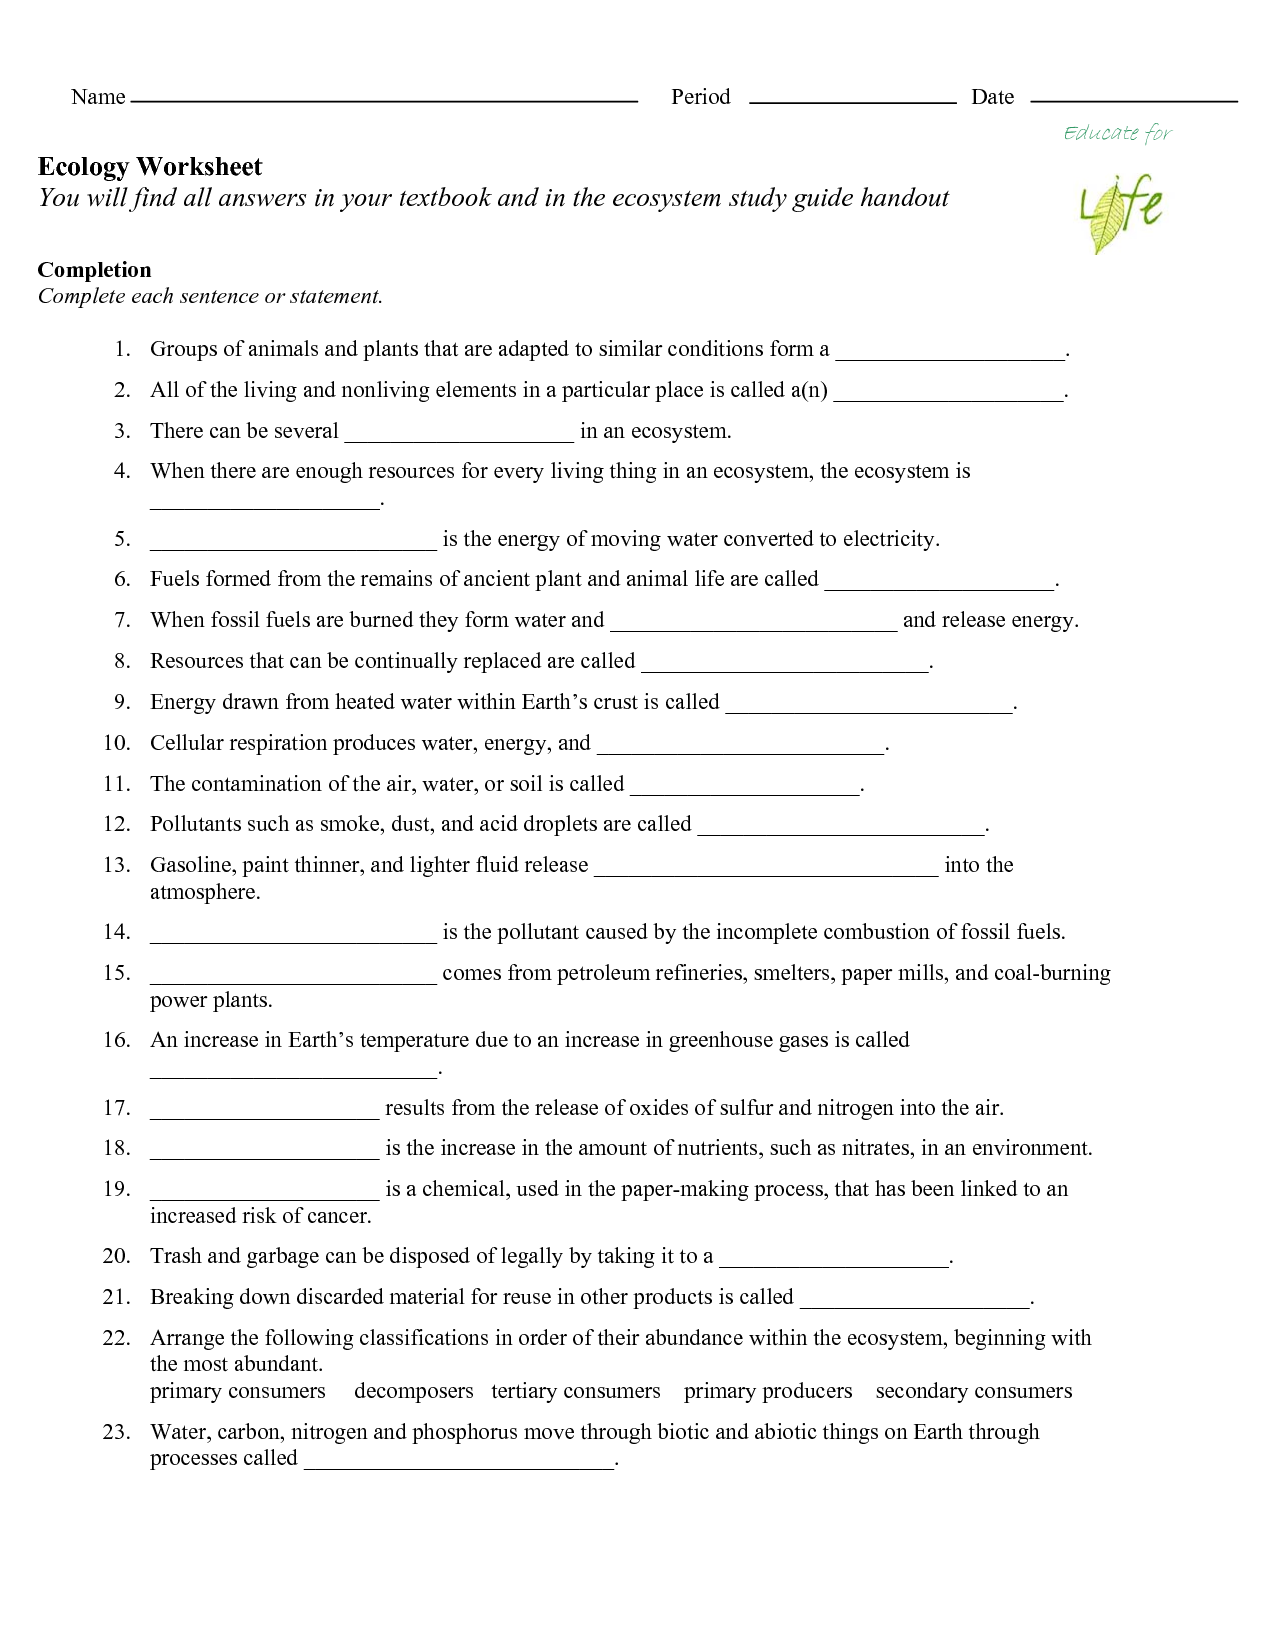 15-best-images-of-carbon-oxygen-cycle-student-worksheets-carbon-cycle-worksheet-answers